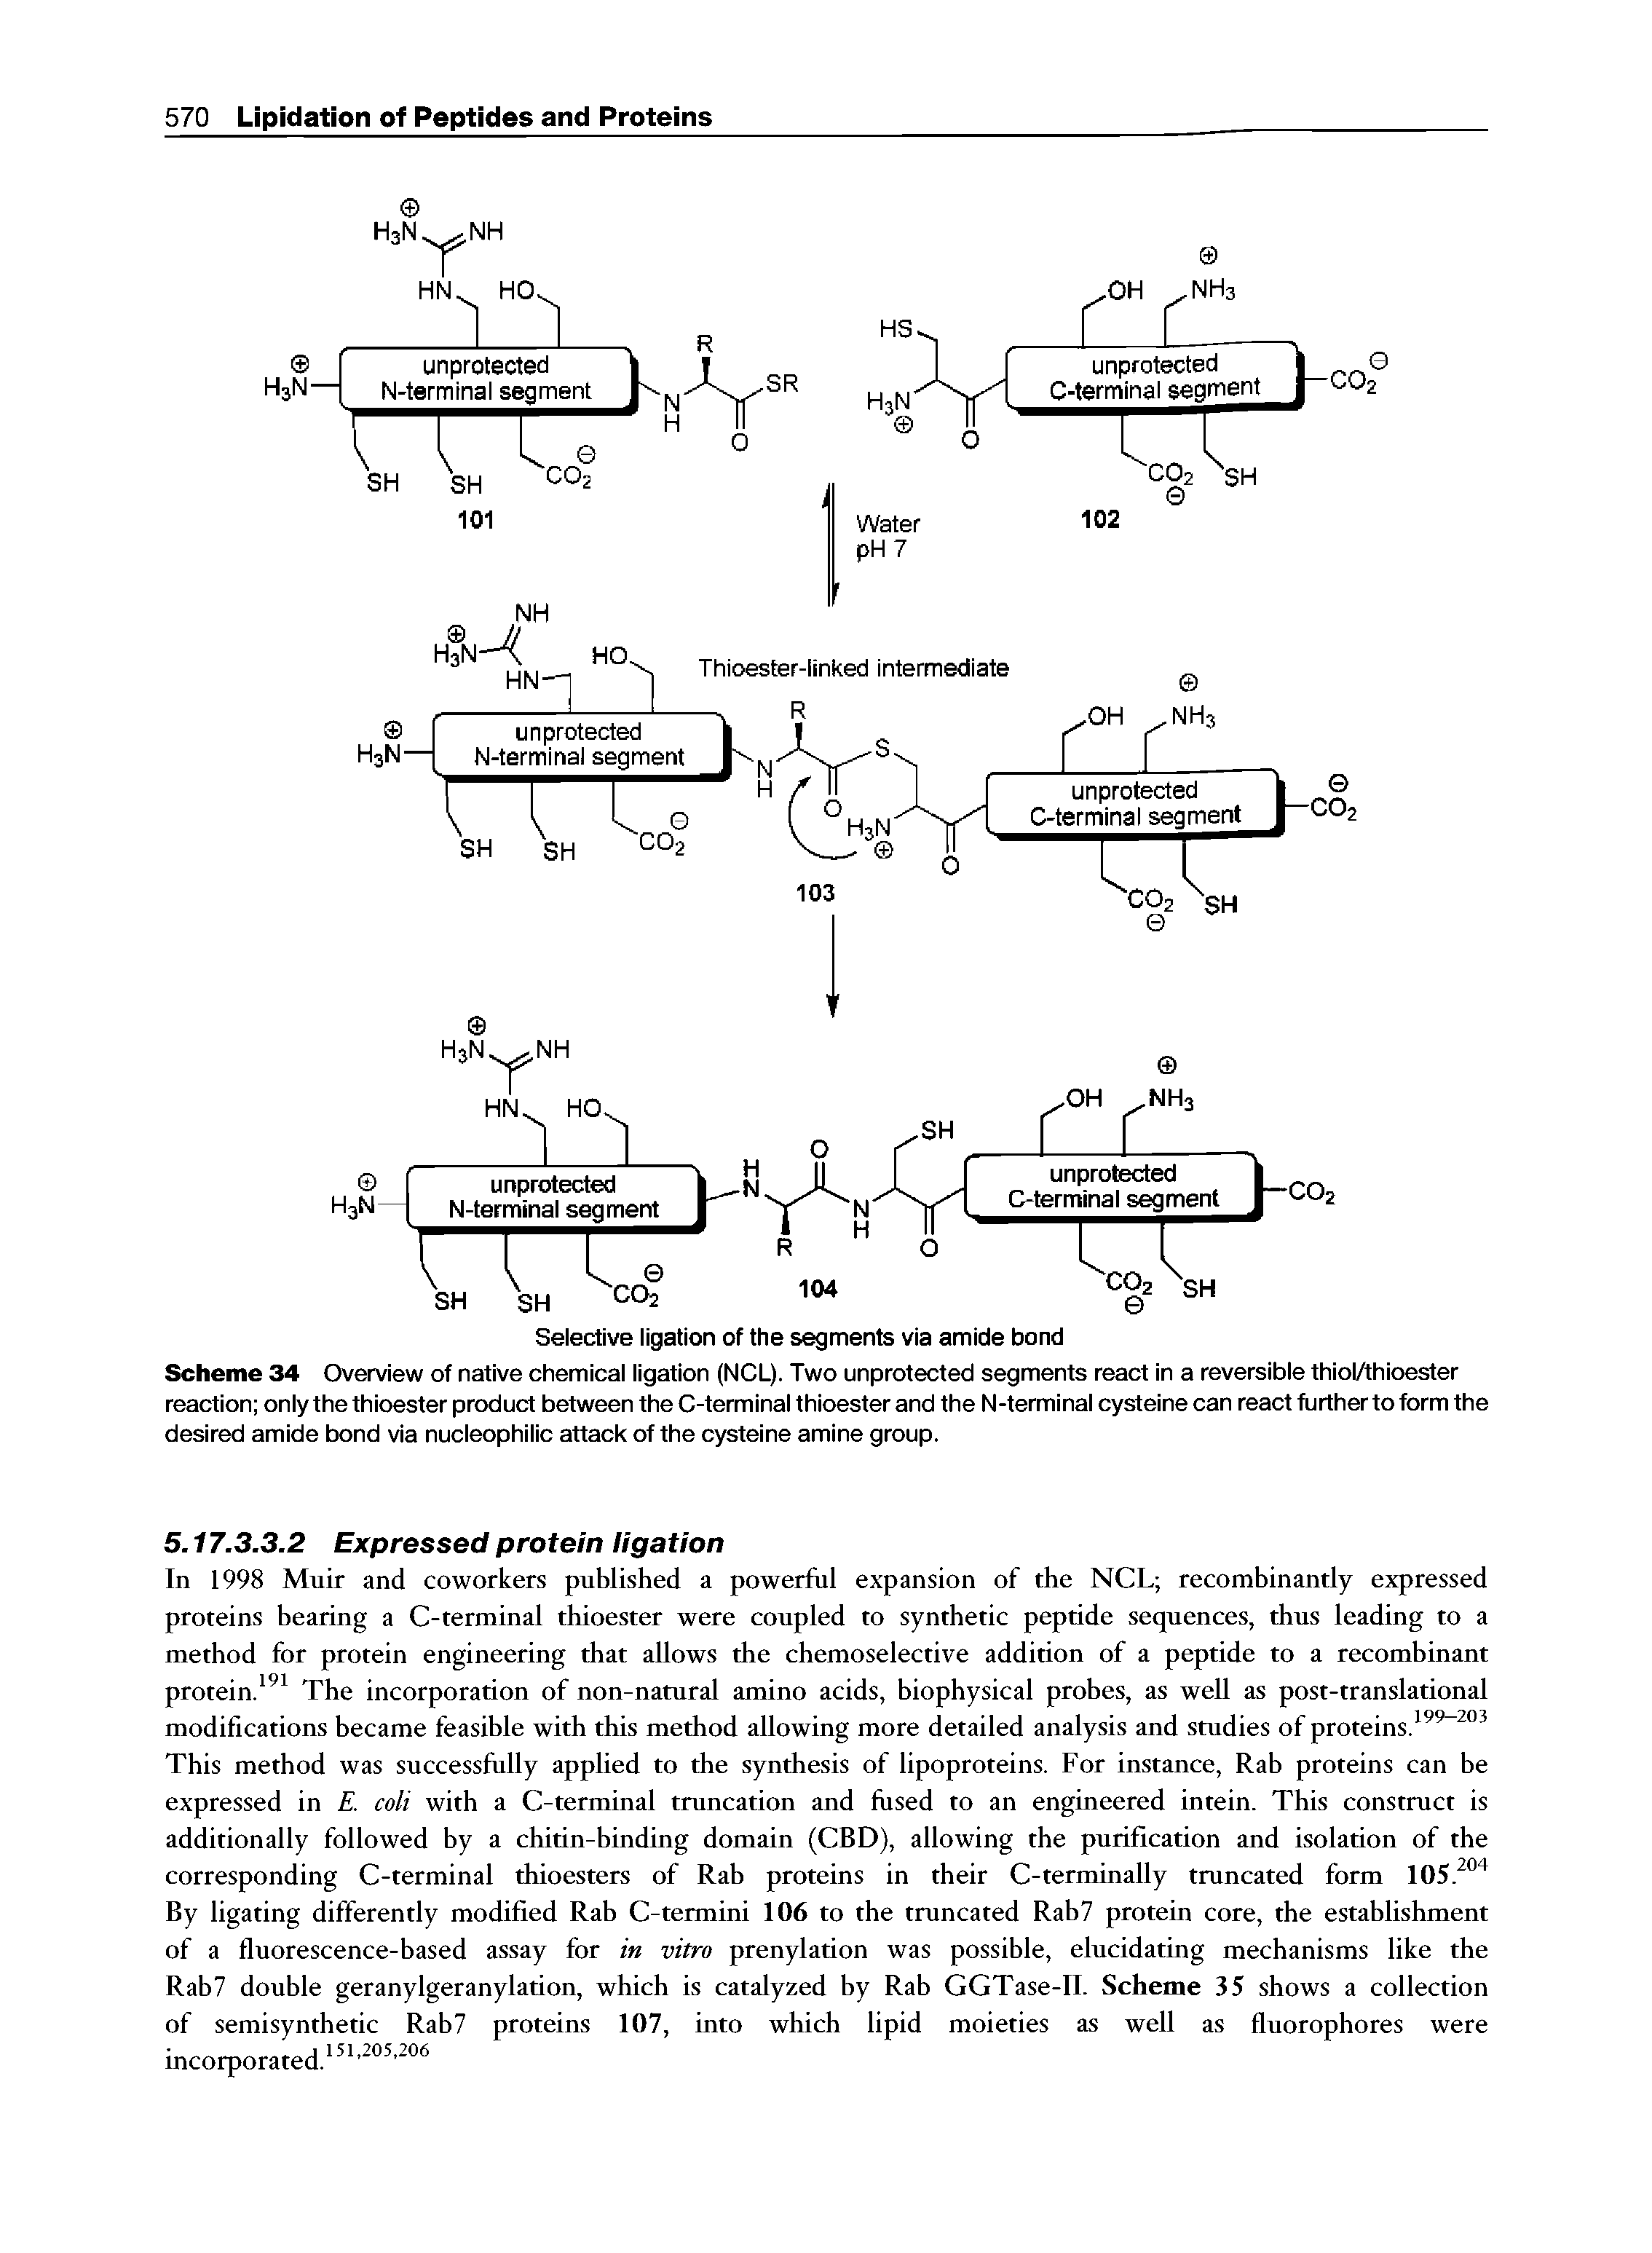 Scheme 34 Overview of native chemical ligation (NCL). Two unprotected segments react in a reversible thiol/thioester reaction only the thioester product between the C-terminal thioester and the N-terminal cysteine can react further to form the desired amide bond via nucleophilic attack of the cysteine amine group.